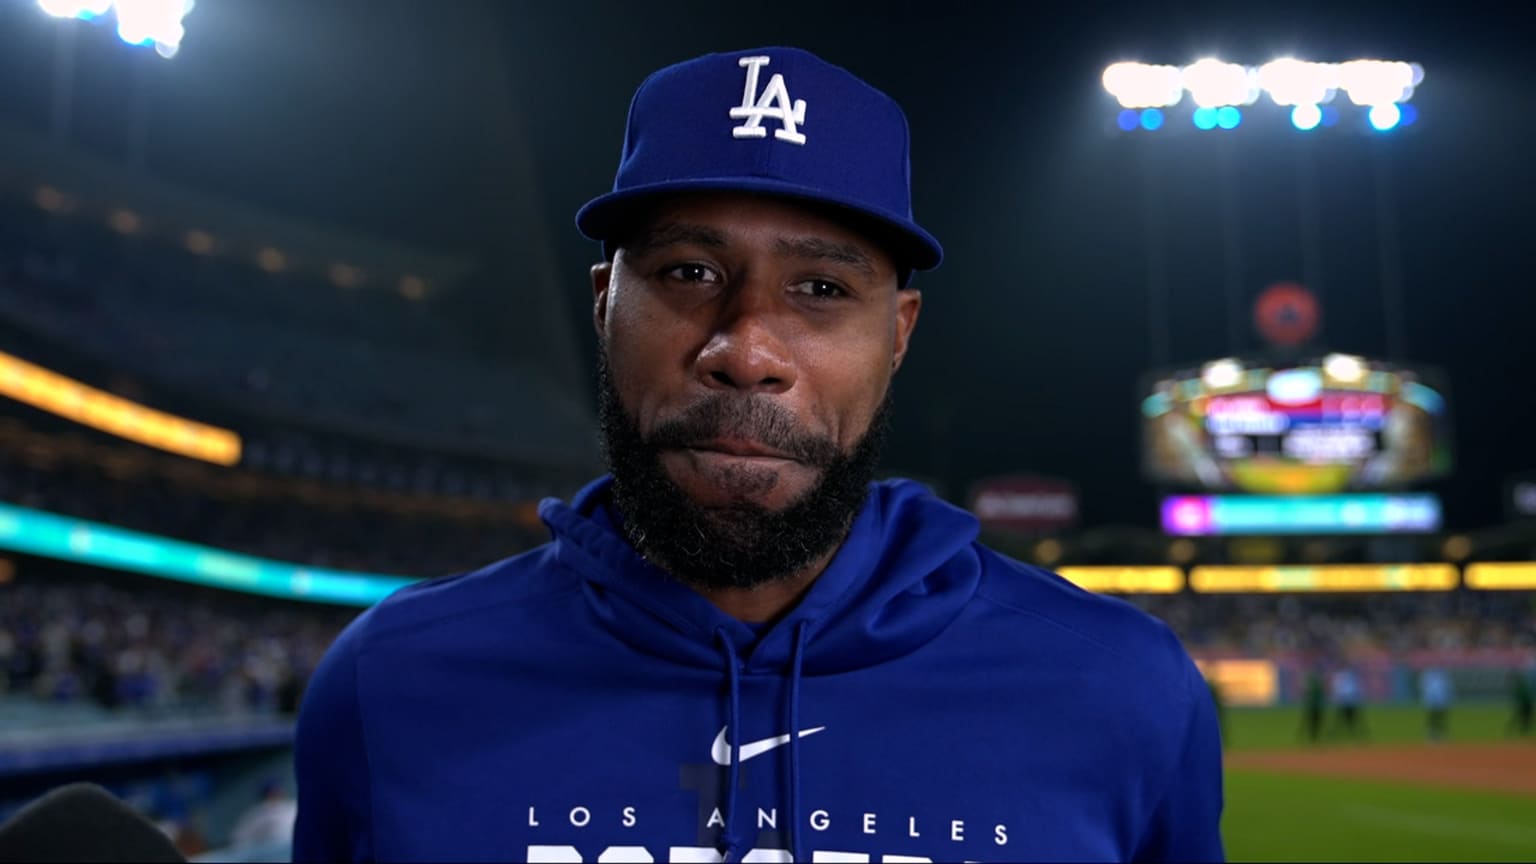 Jason Heyward will have 'every opportunity' to win Dodgers' OF job